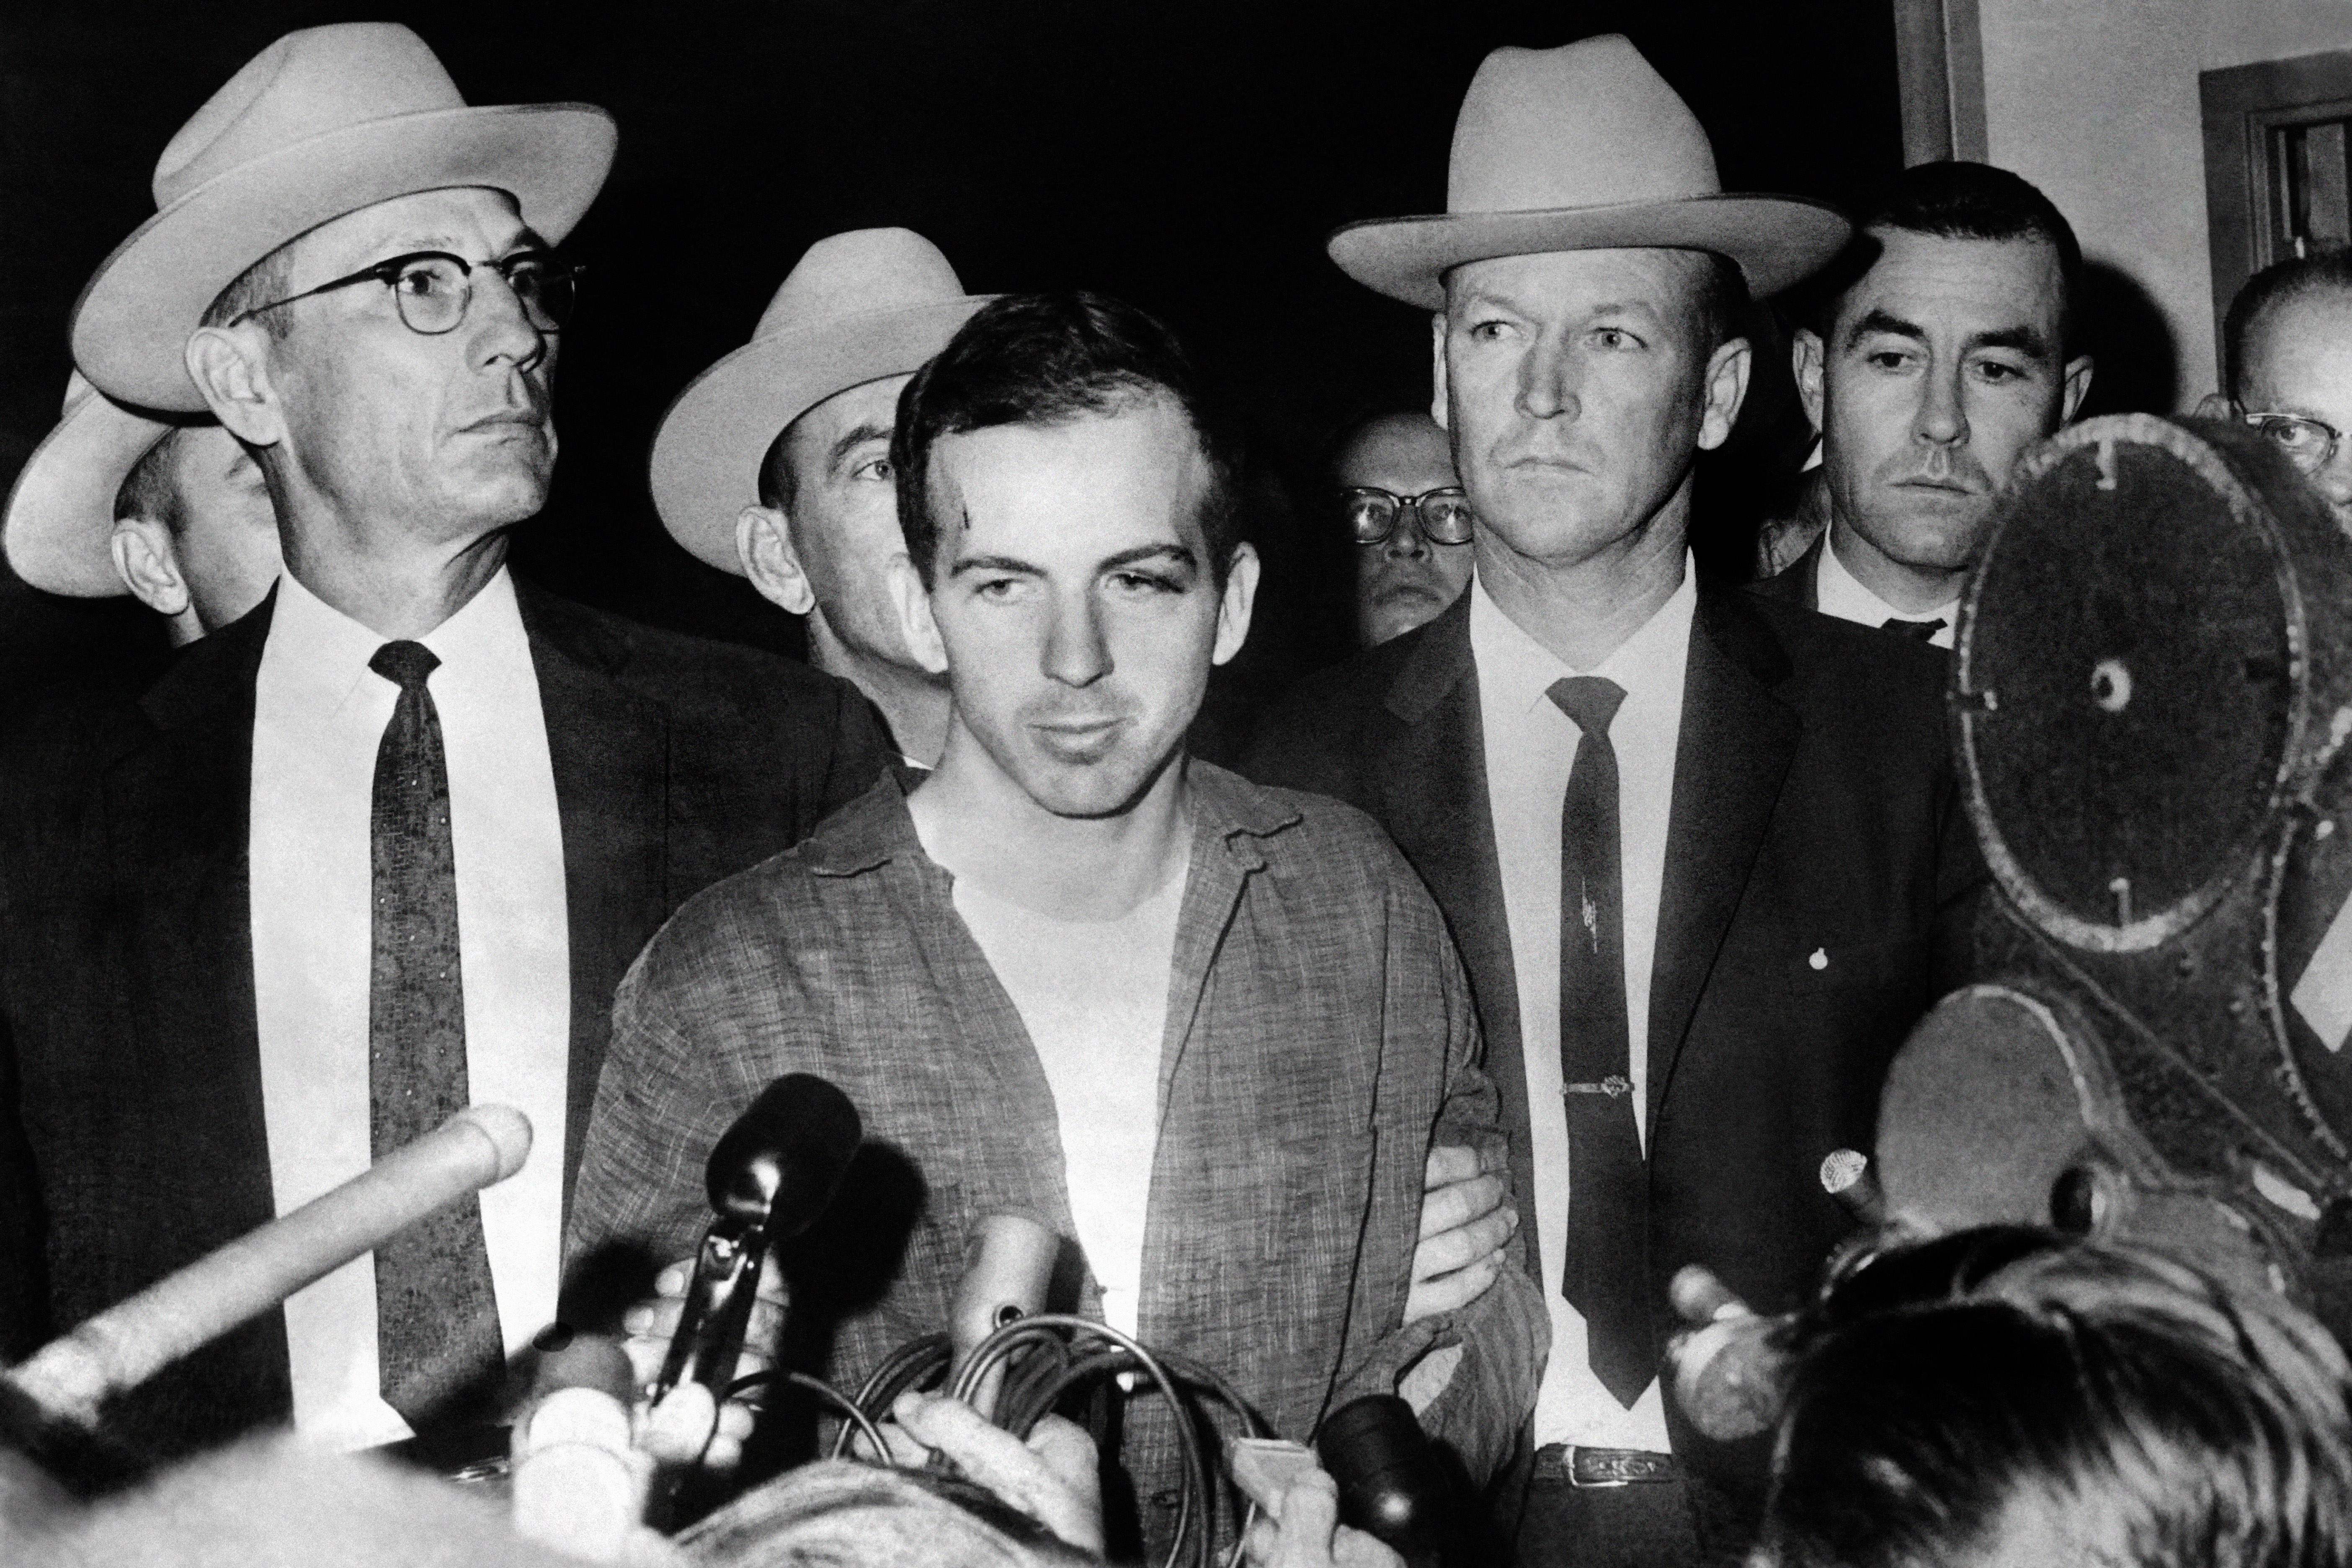 Assassination suspect Lee Harvey Oswald during a press conference after his arrest in Dallas – shortly before he too was shot dead